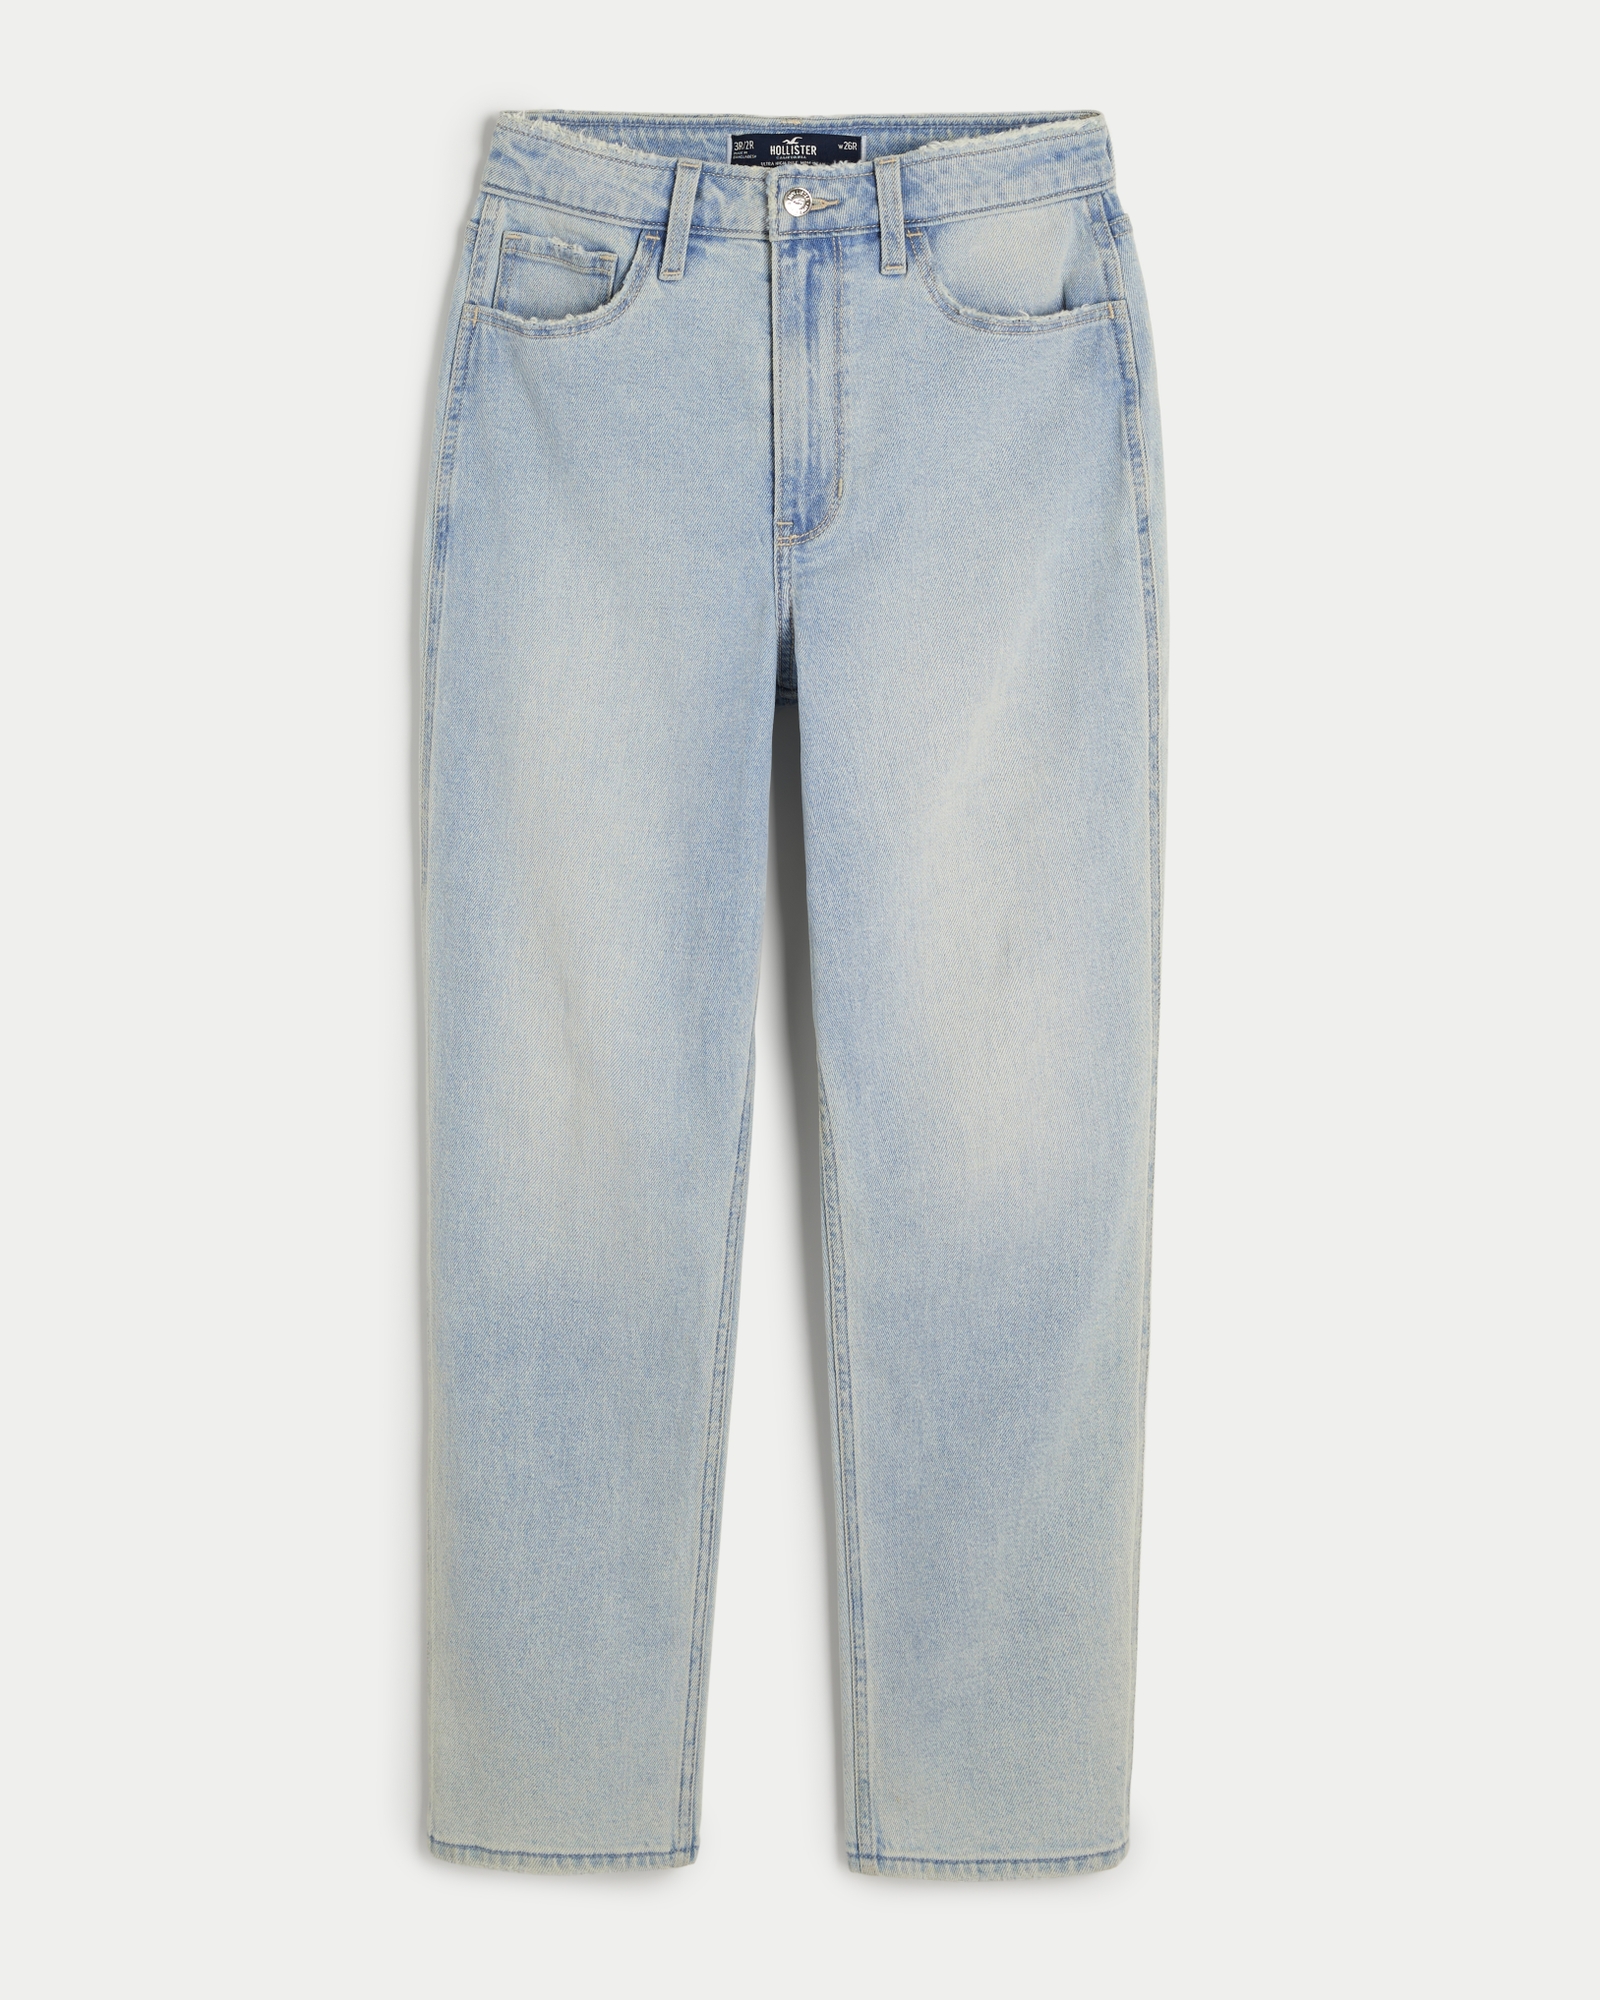 https://img.hollisterco.com/is/image/anf/KIC_355-3147-6705-281_prod1.jpg?policy=product-extra-large